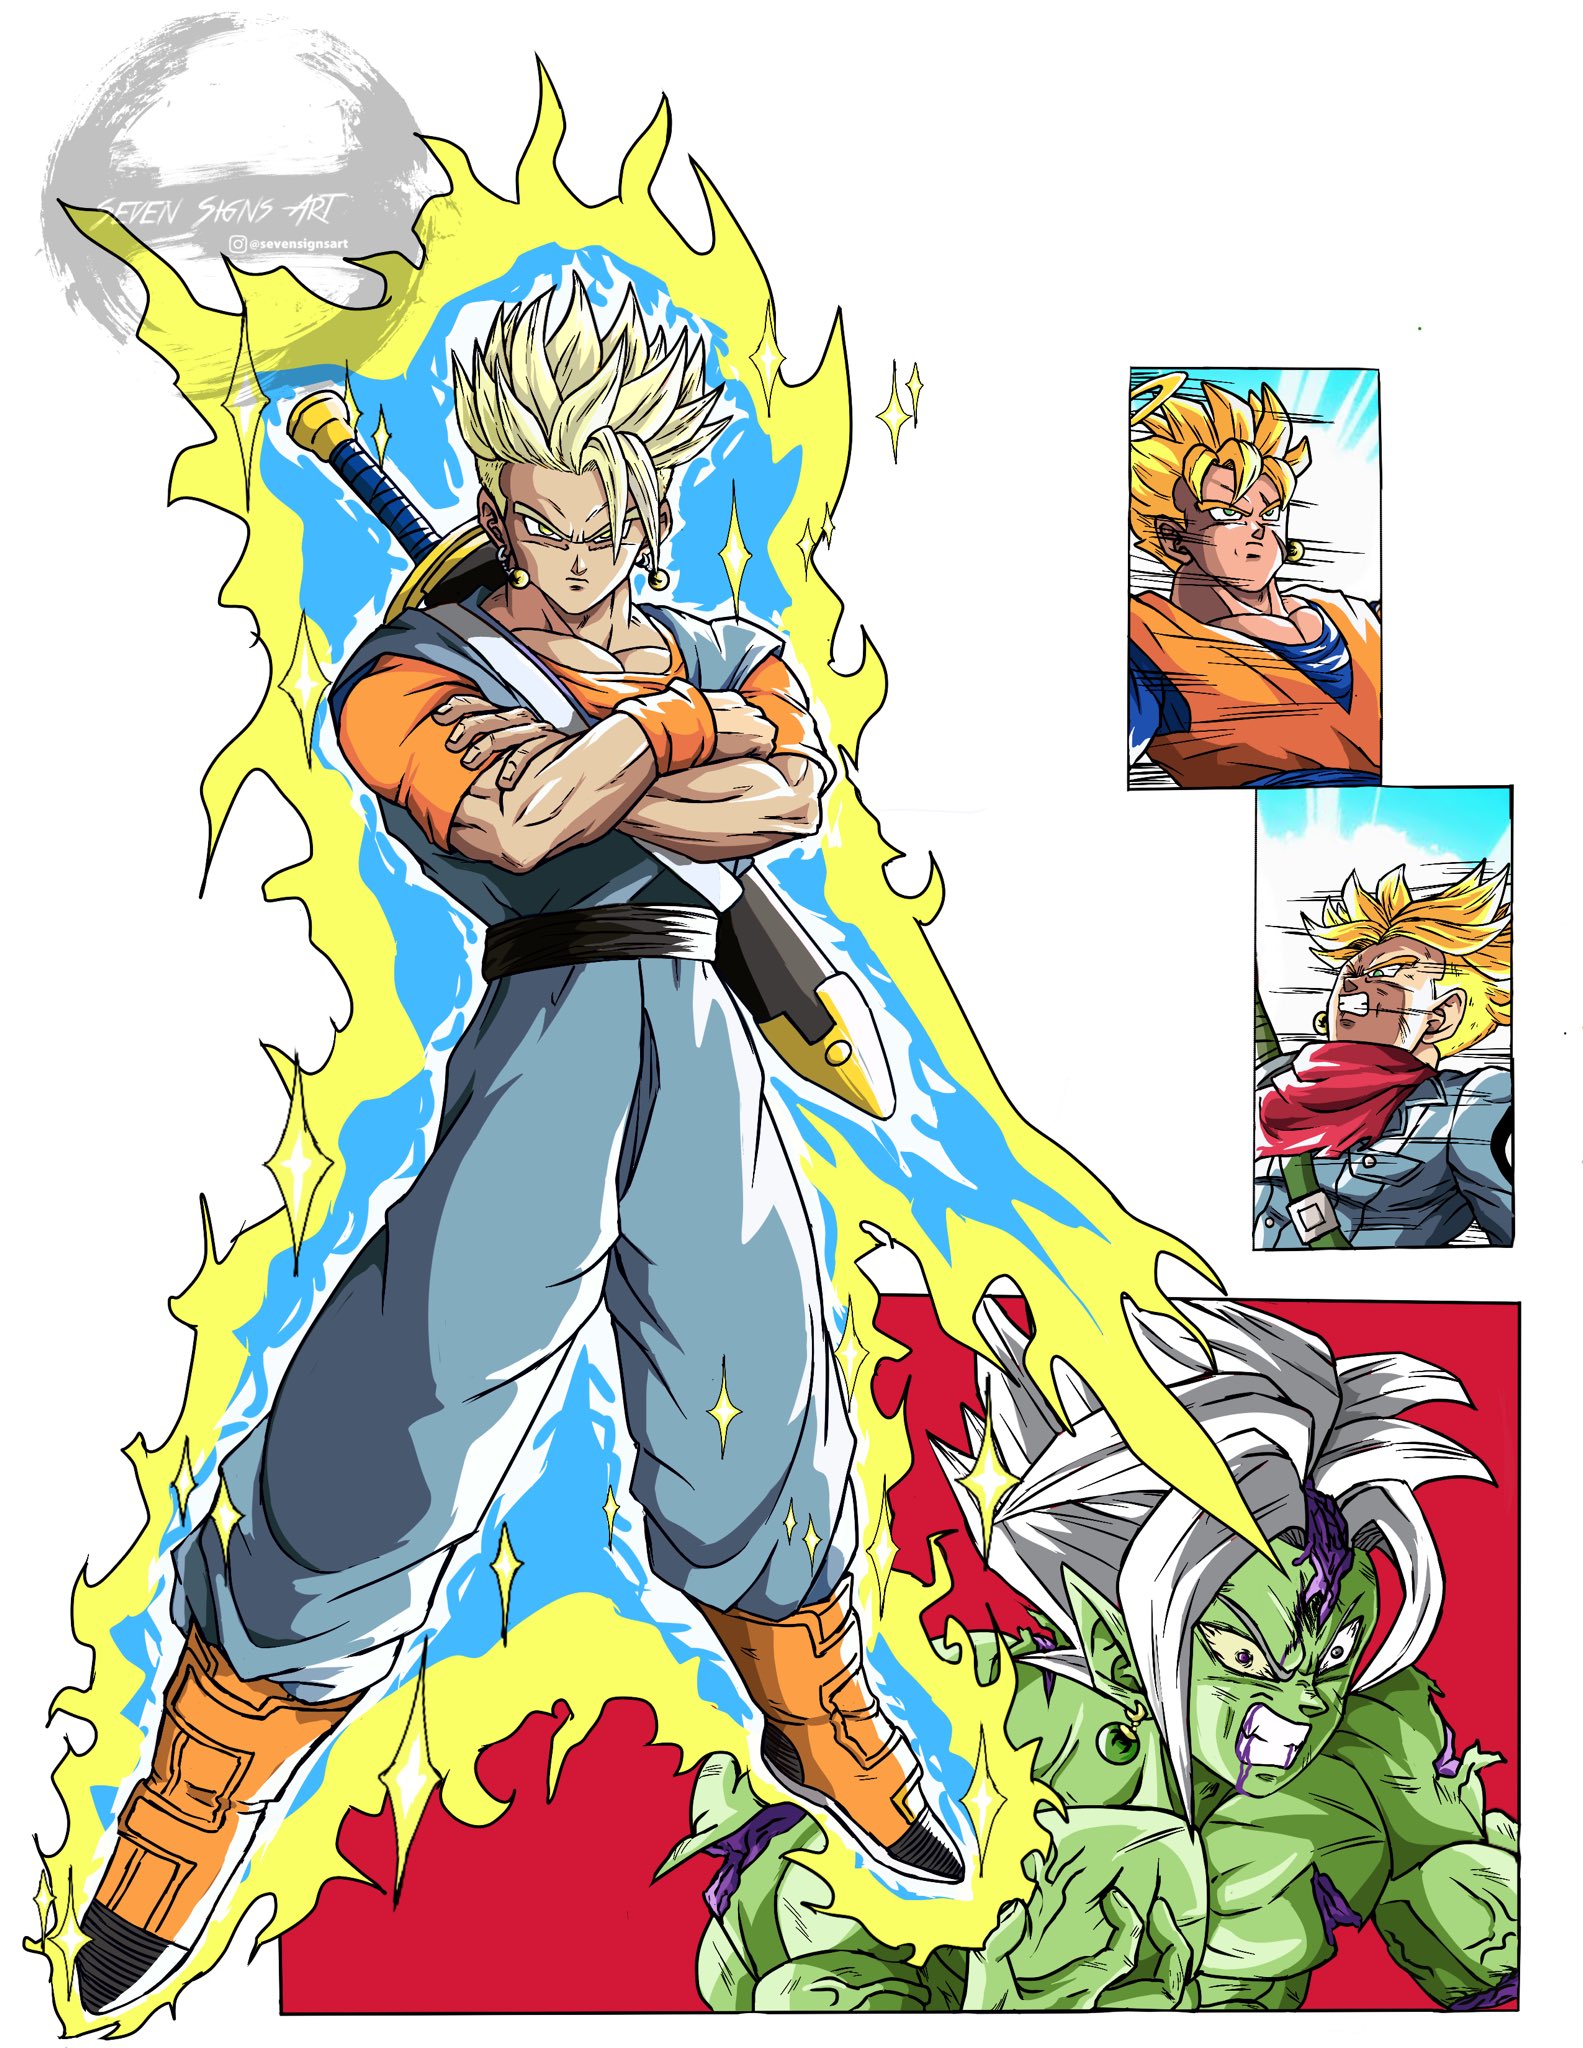 Double Legendary Summon Carnival Is Now On! New SSR Super Saiyan Trunks  (Future) and SSR Super Saiyan Gohan (Future) arrive! [For more…